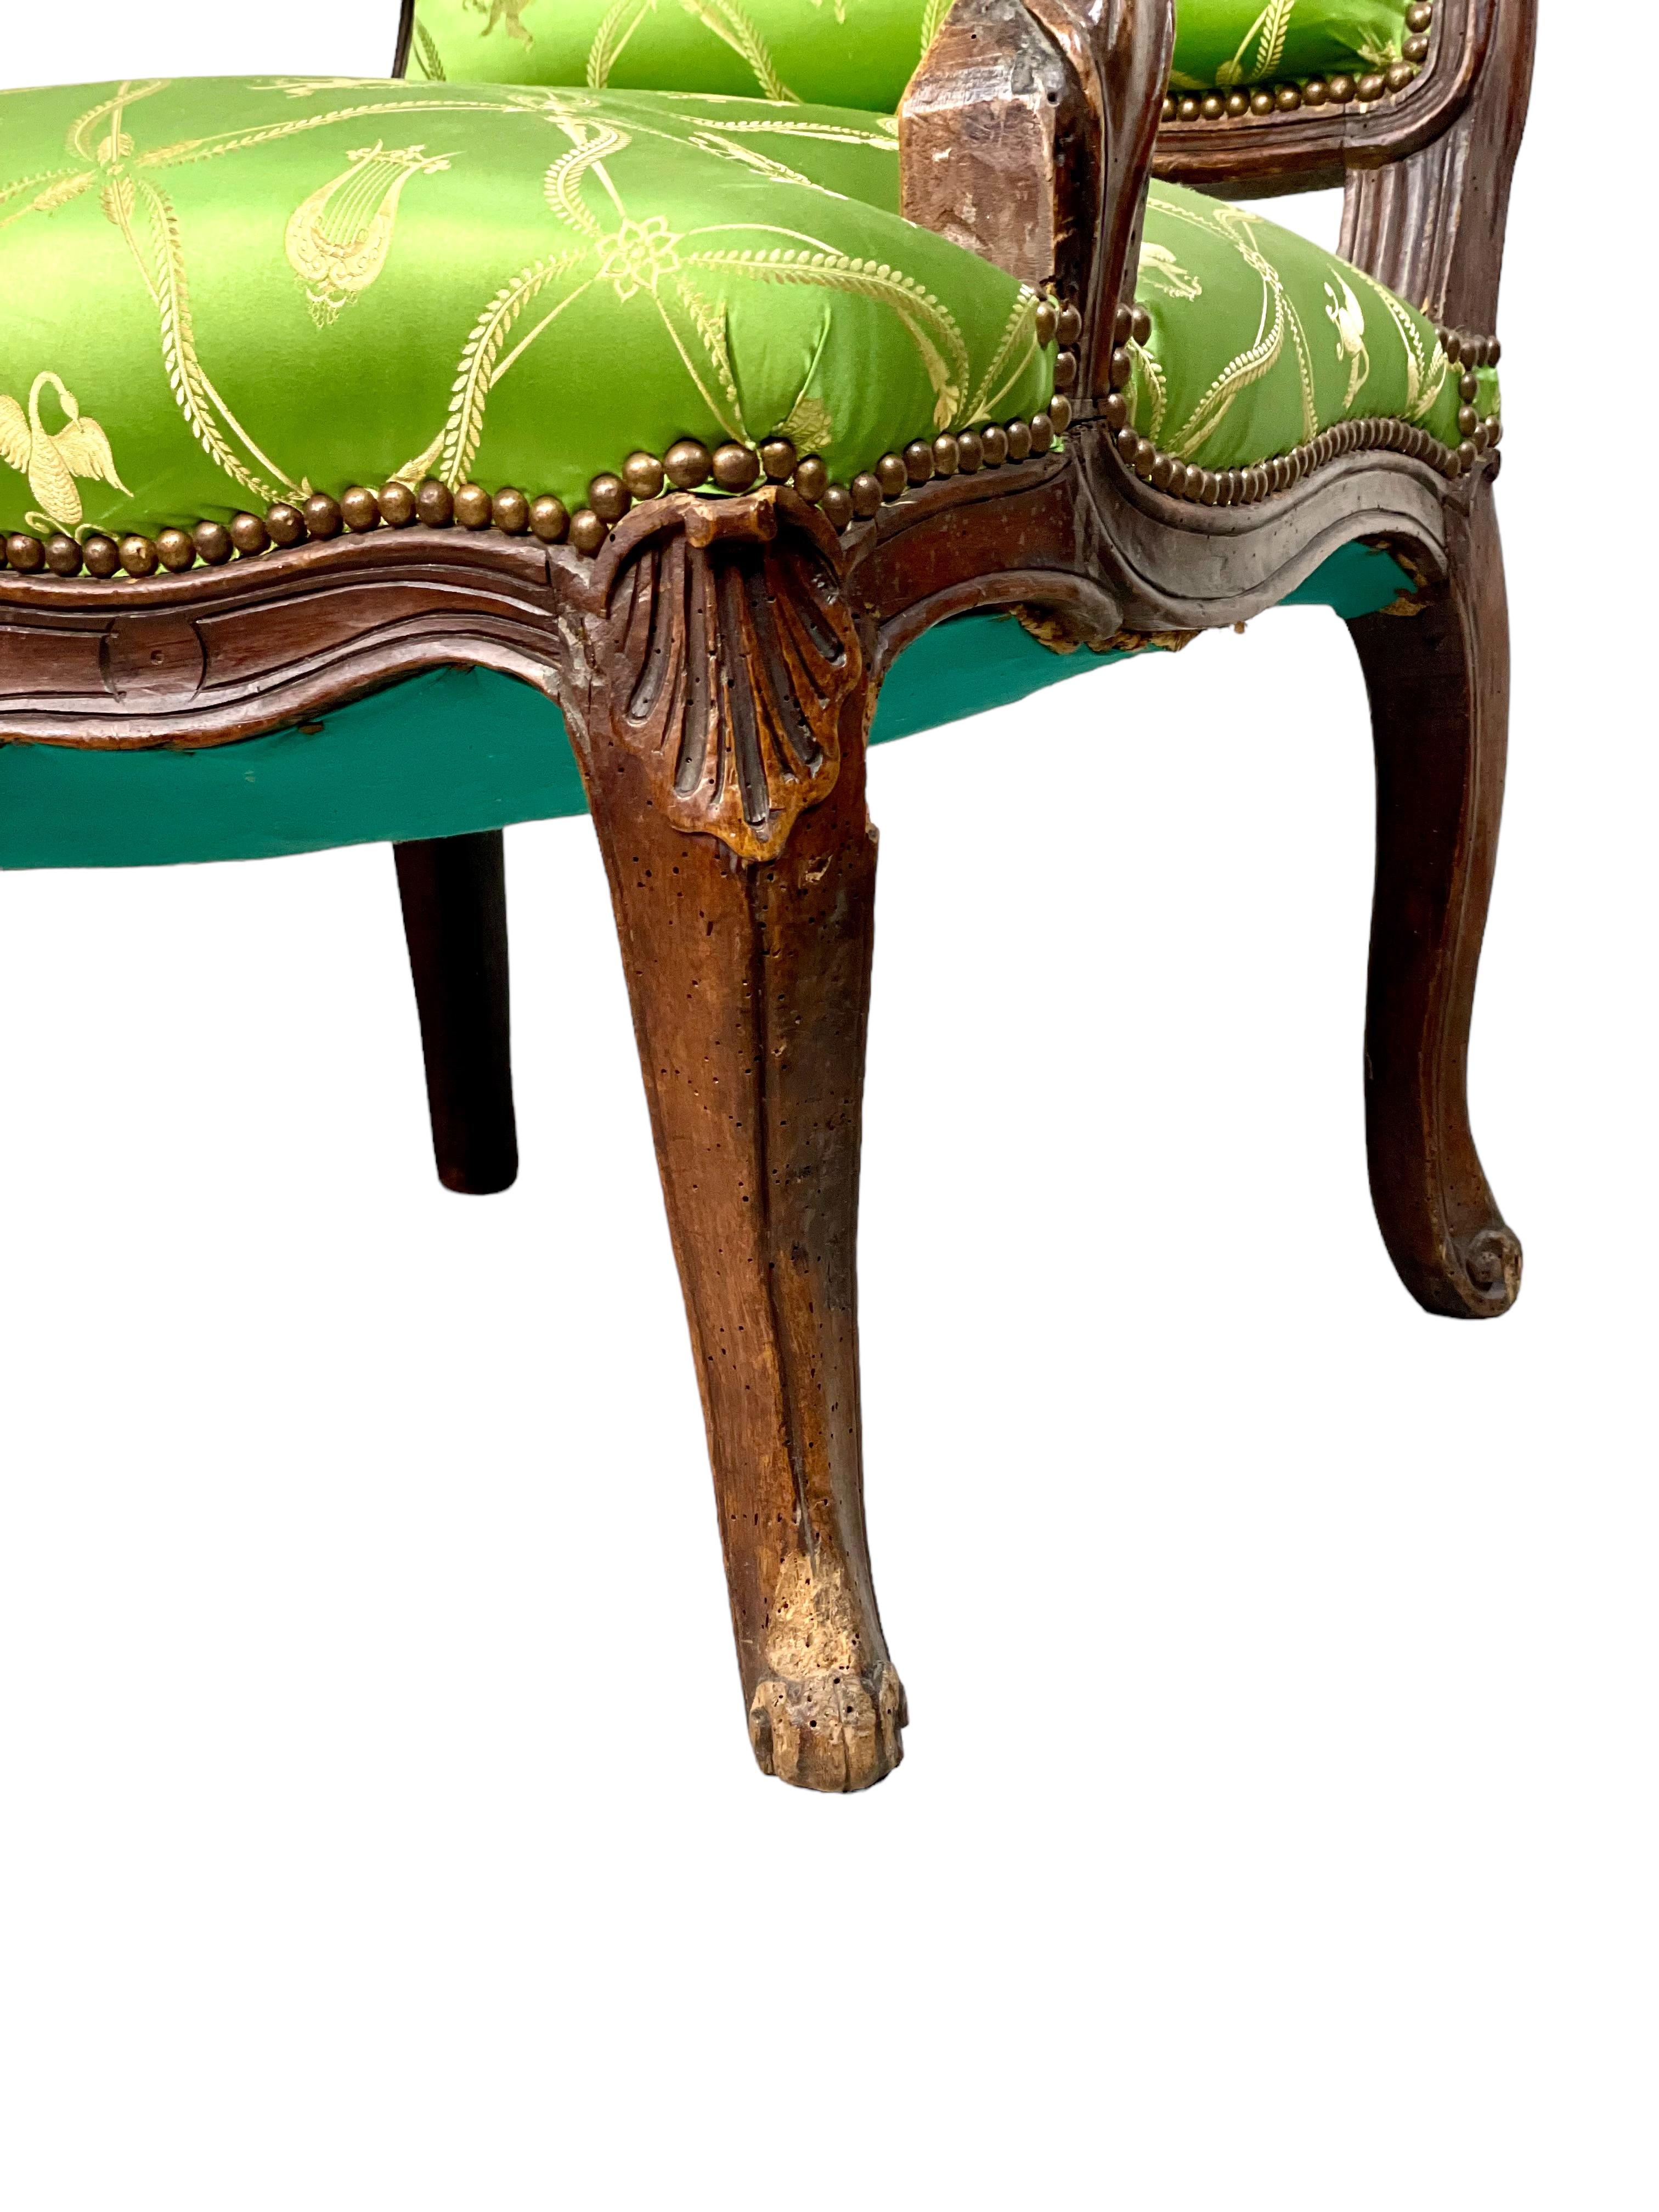 A wide and comfortable Louis XV style fauteuil, hand carved in the 18th century and featuring exquisite green silk upholstery woven with neoclassical motifs of lyres, cherubs, peacocks and swans. The shoulder-high camel back rest and arm rests are